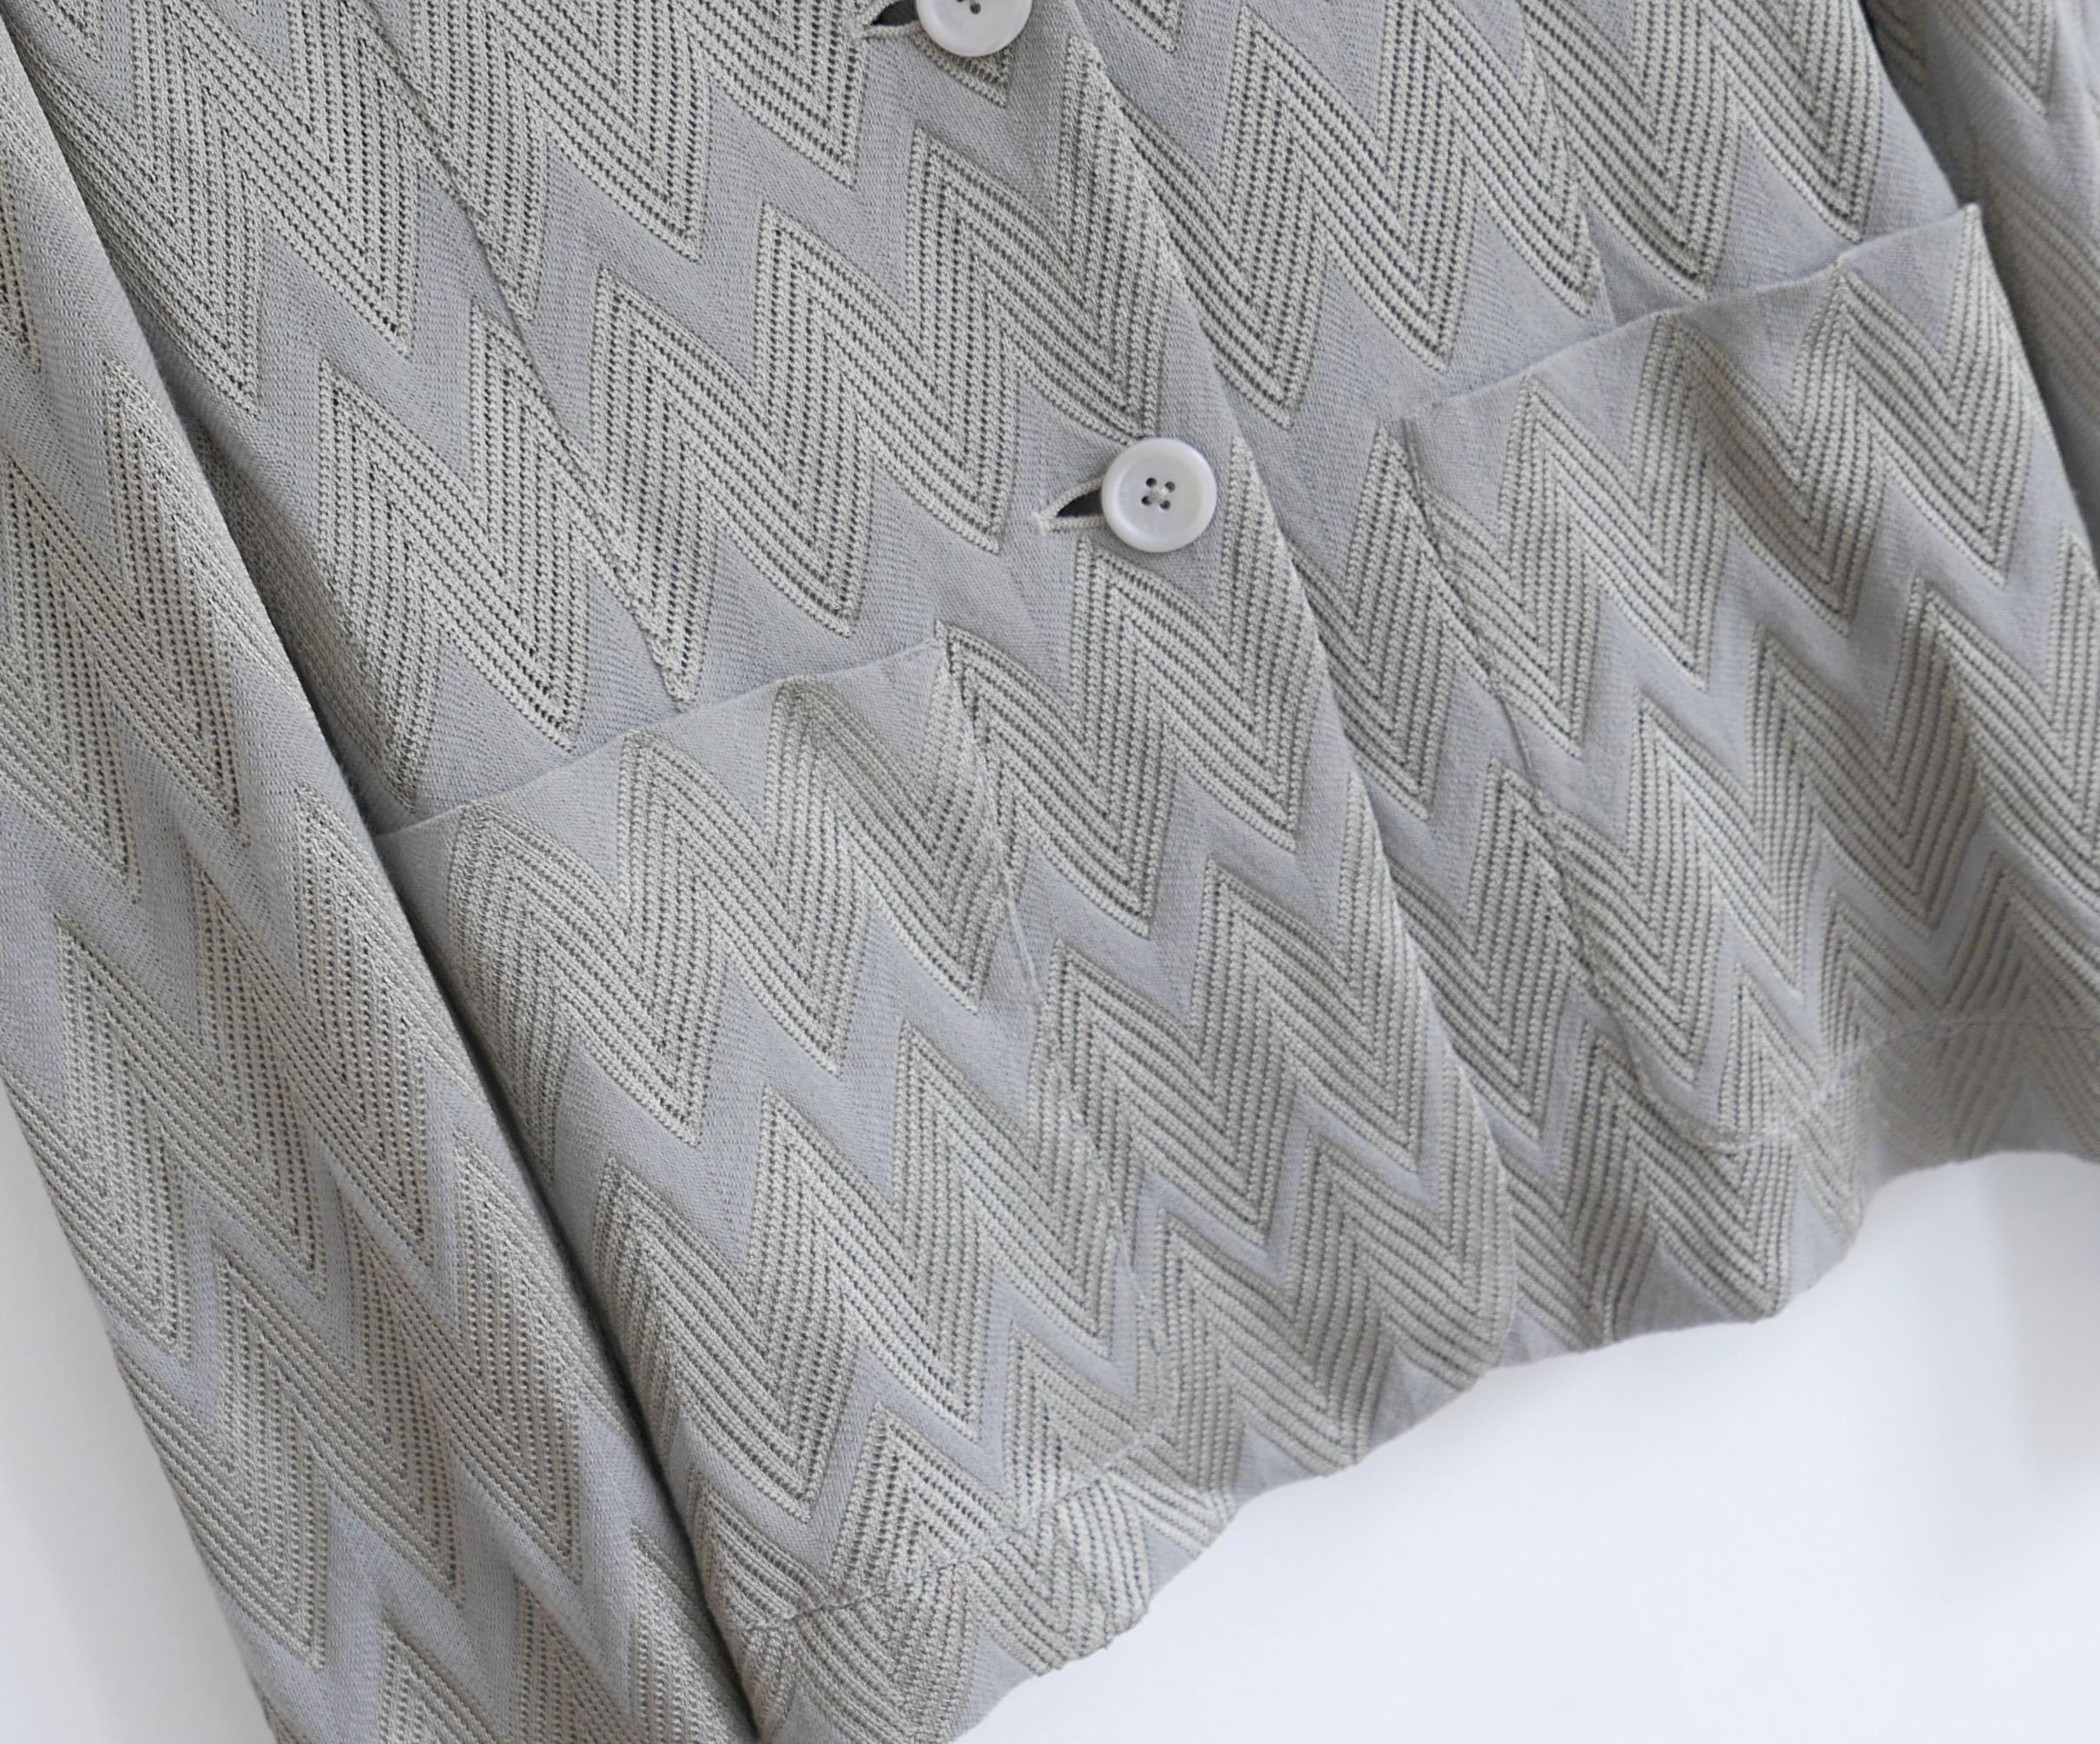 Classic, timeless Missoni knit blazer jacket. Bought for £1300 and new with tags. Made from silver grey and taupe grey rayon and wool with signature texture zig zag weave, it has a semi relaxed fit with patch pockets, small lapels and shaped back